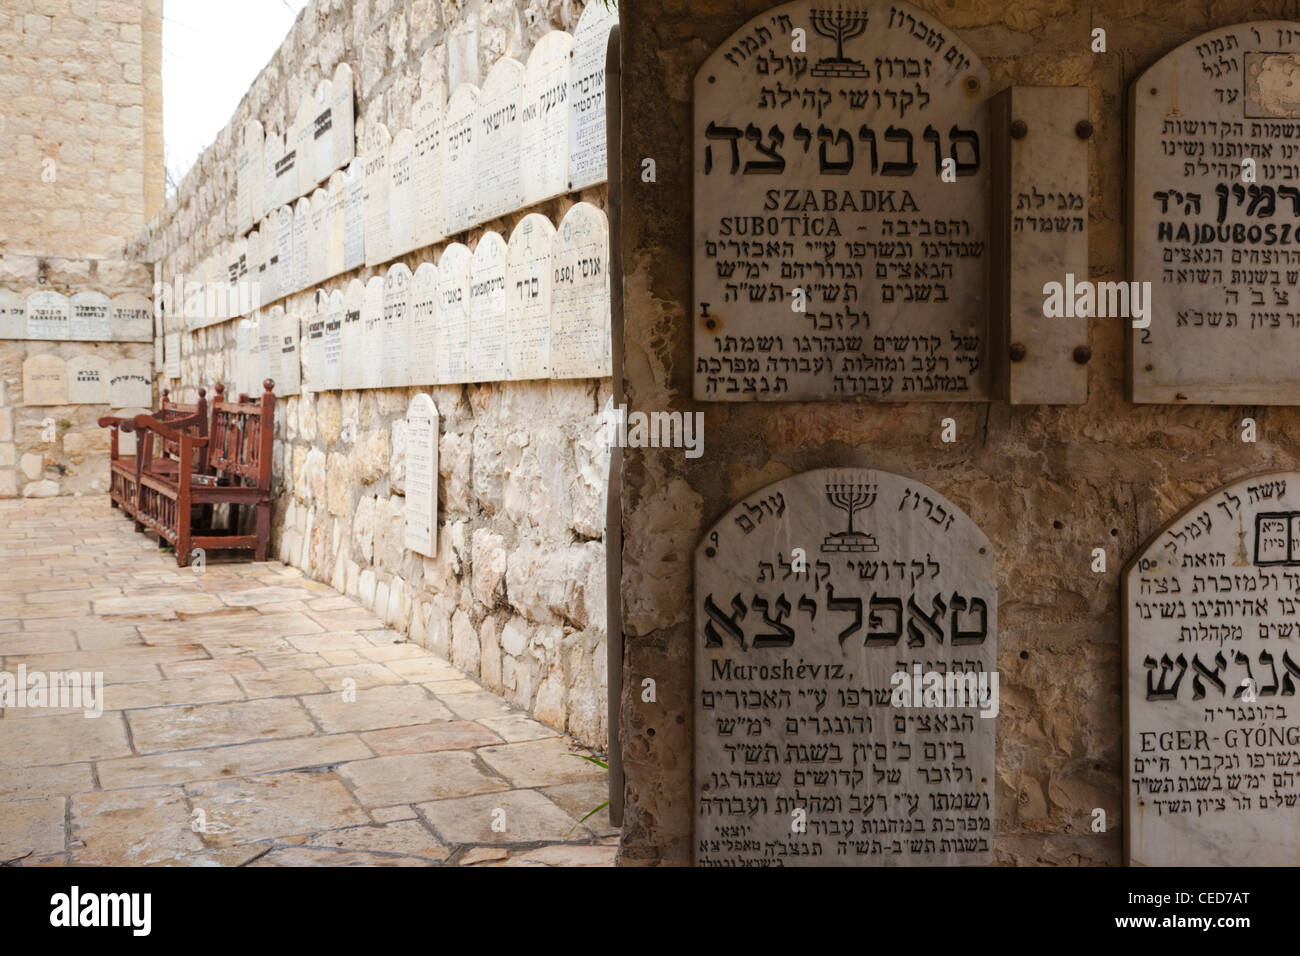 Israel, Jerusalem, Old City, Mt. Zion, Chamber of the Holocaust, memorial to Holocaust victims 1939-1945 Stock Photo